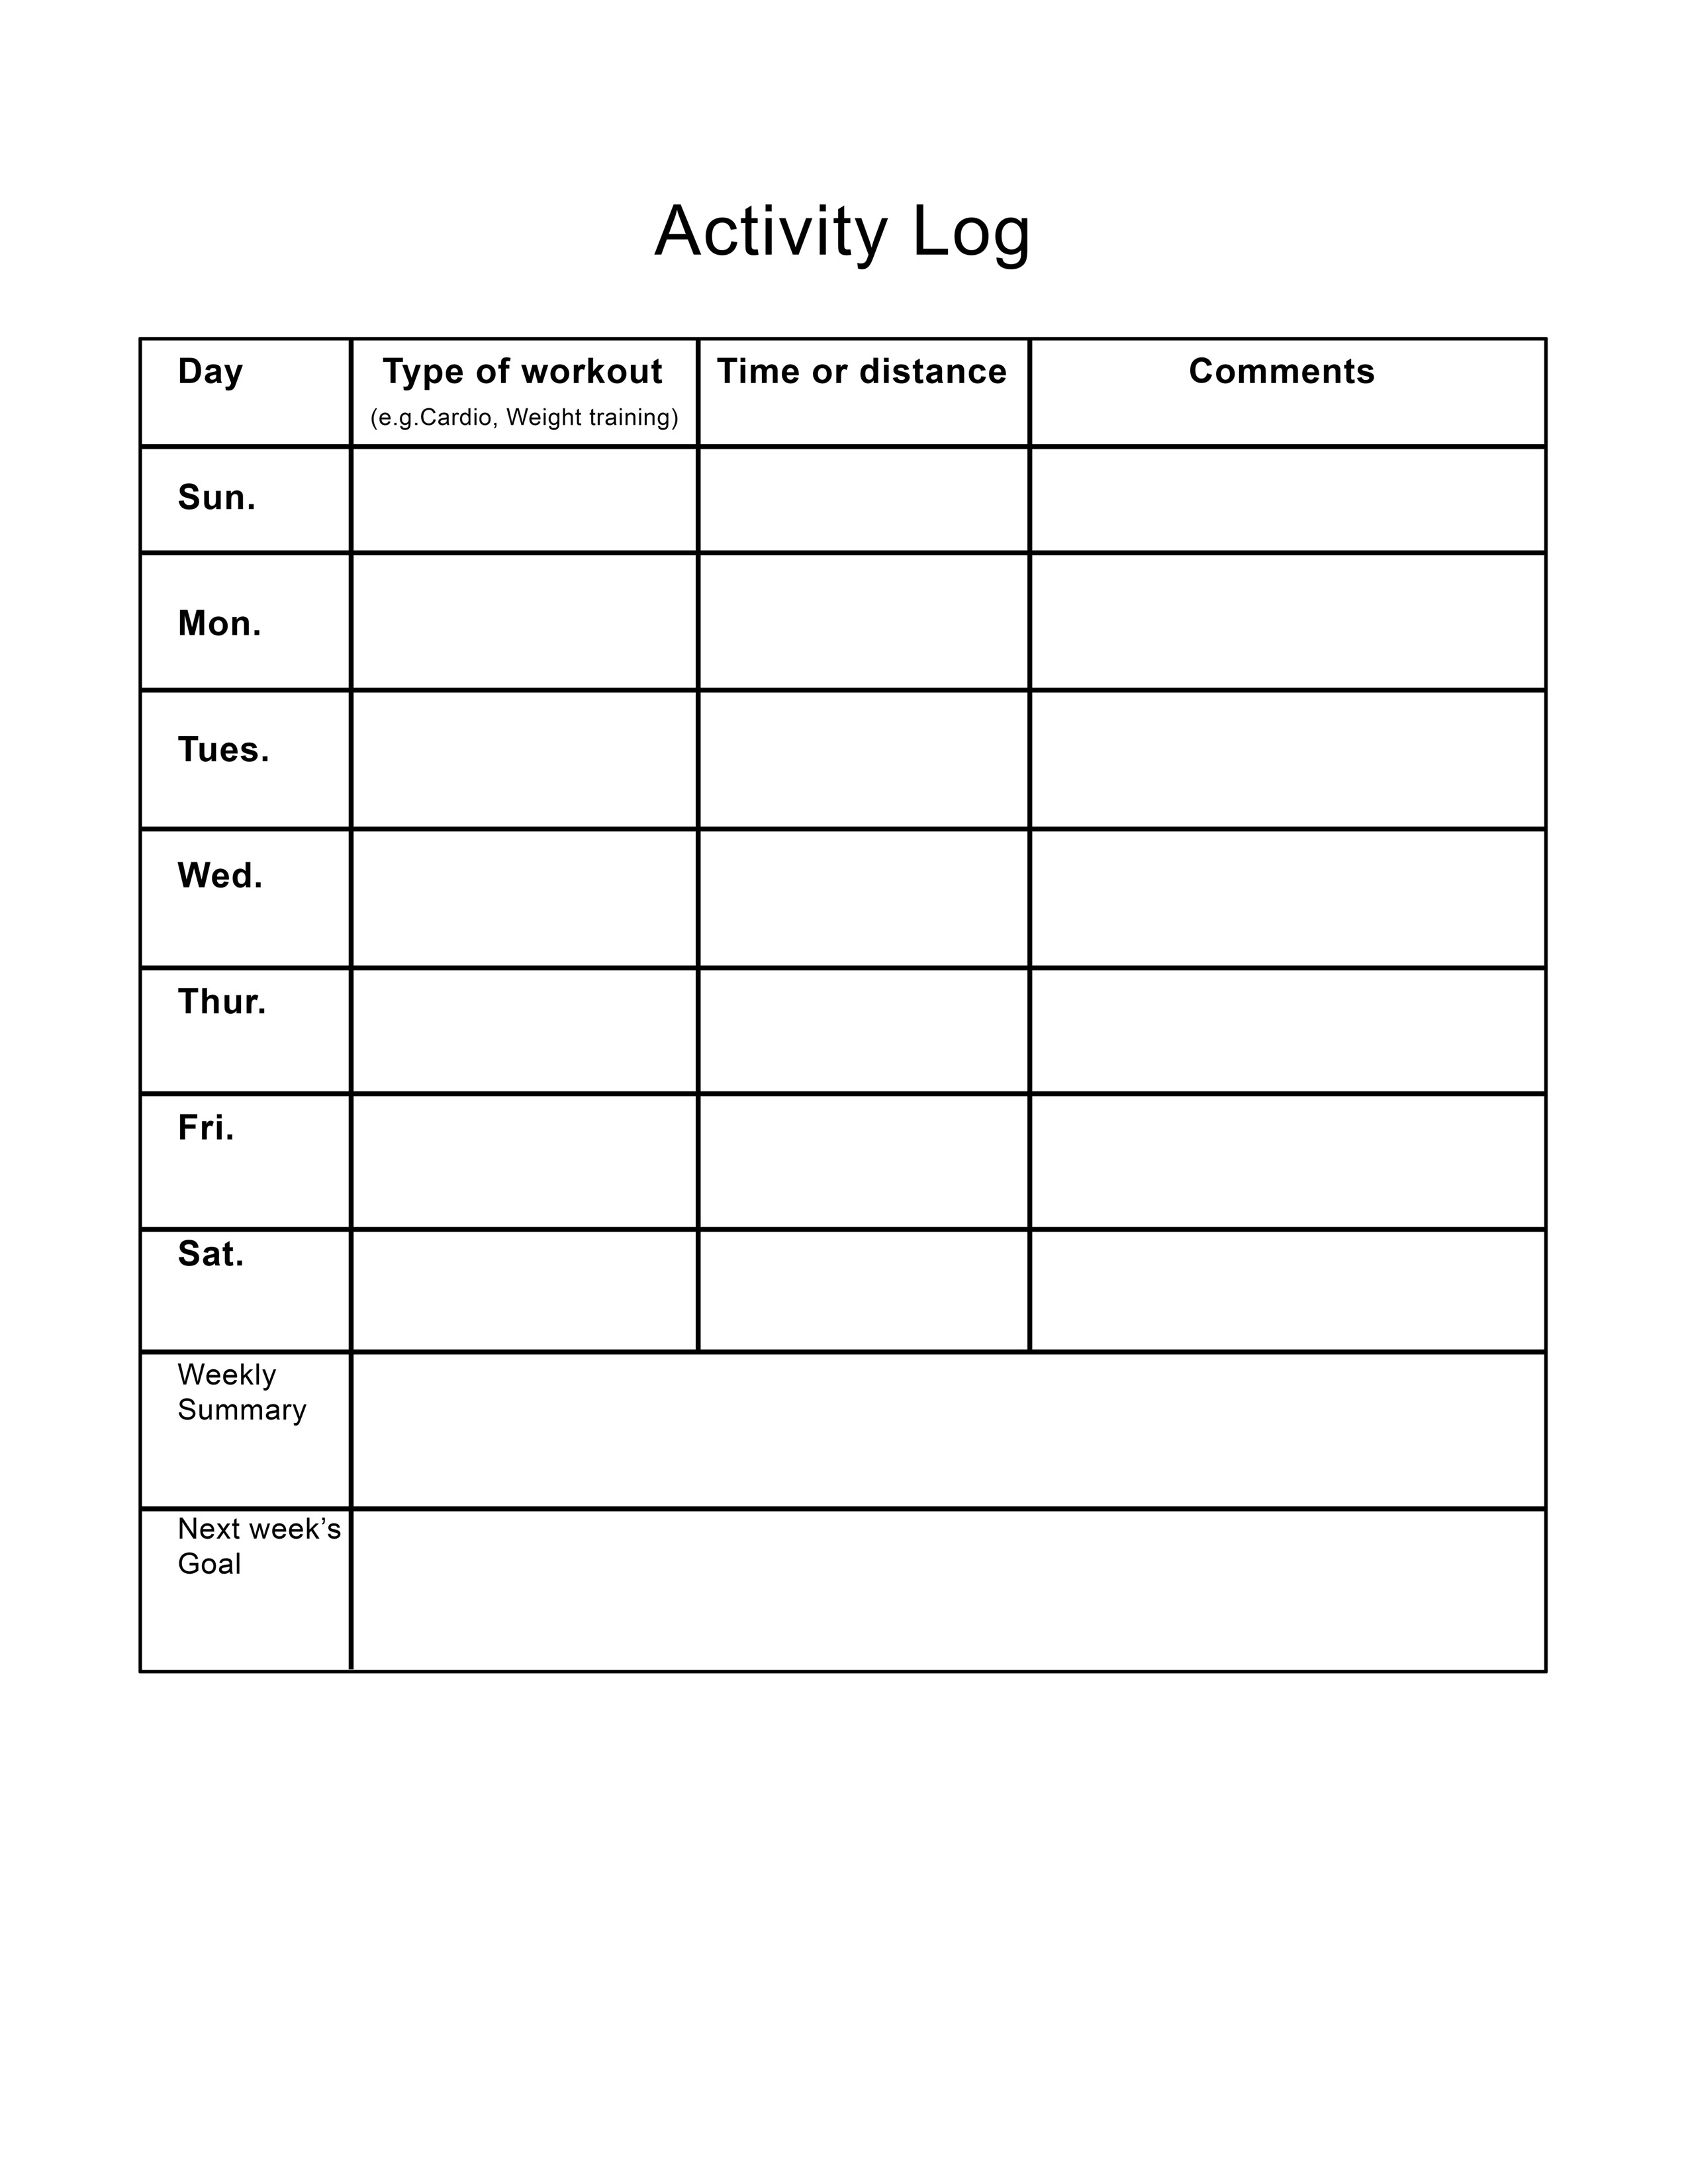 Printable exercise activity log sheet up to 11 by 8.5 inches.